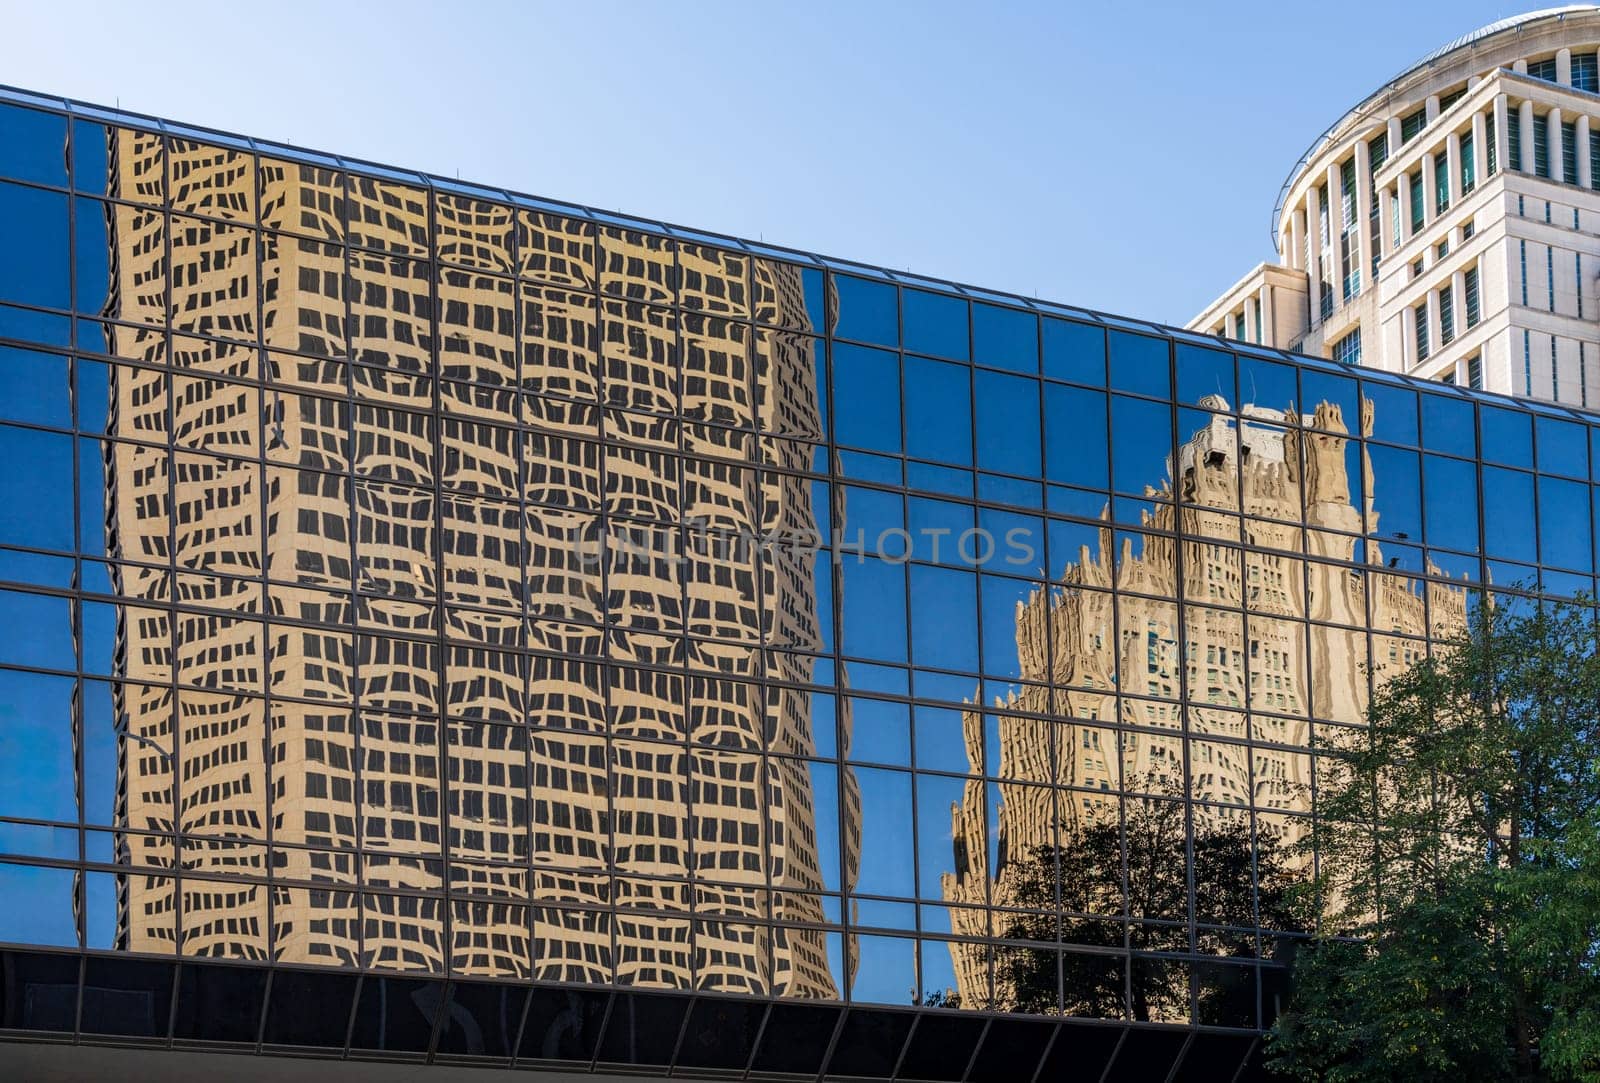 Reflections of two modern office skyscrapers in a mirrored building on Market street in downtown St Louis in Missouri